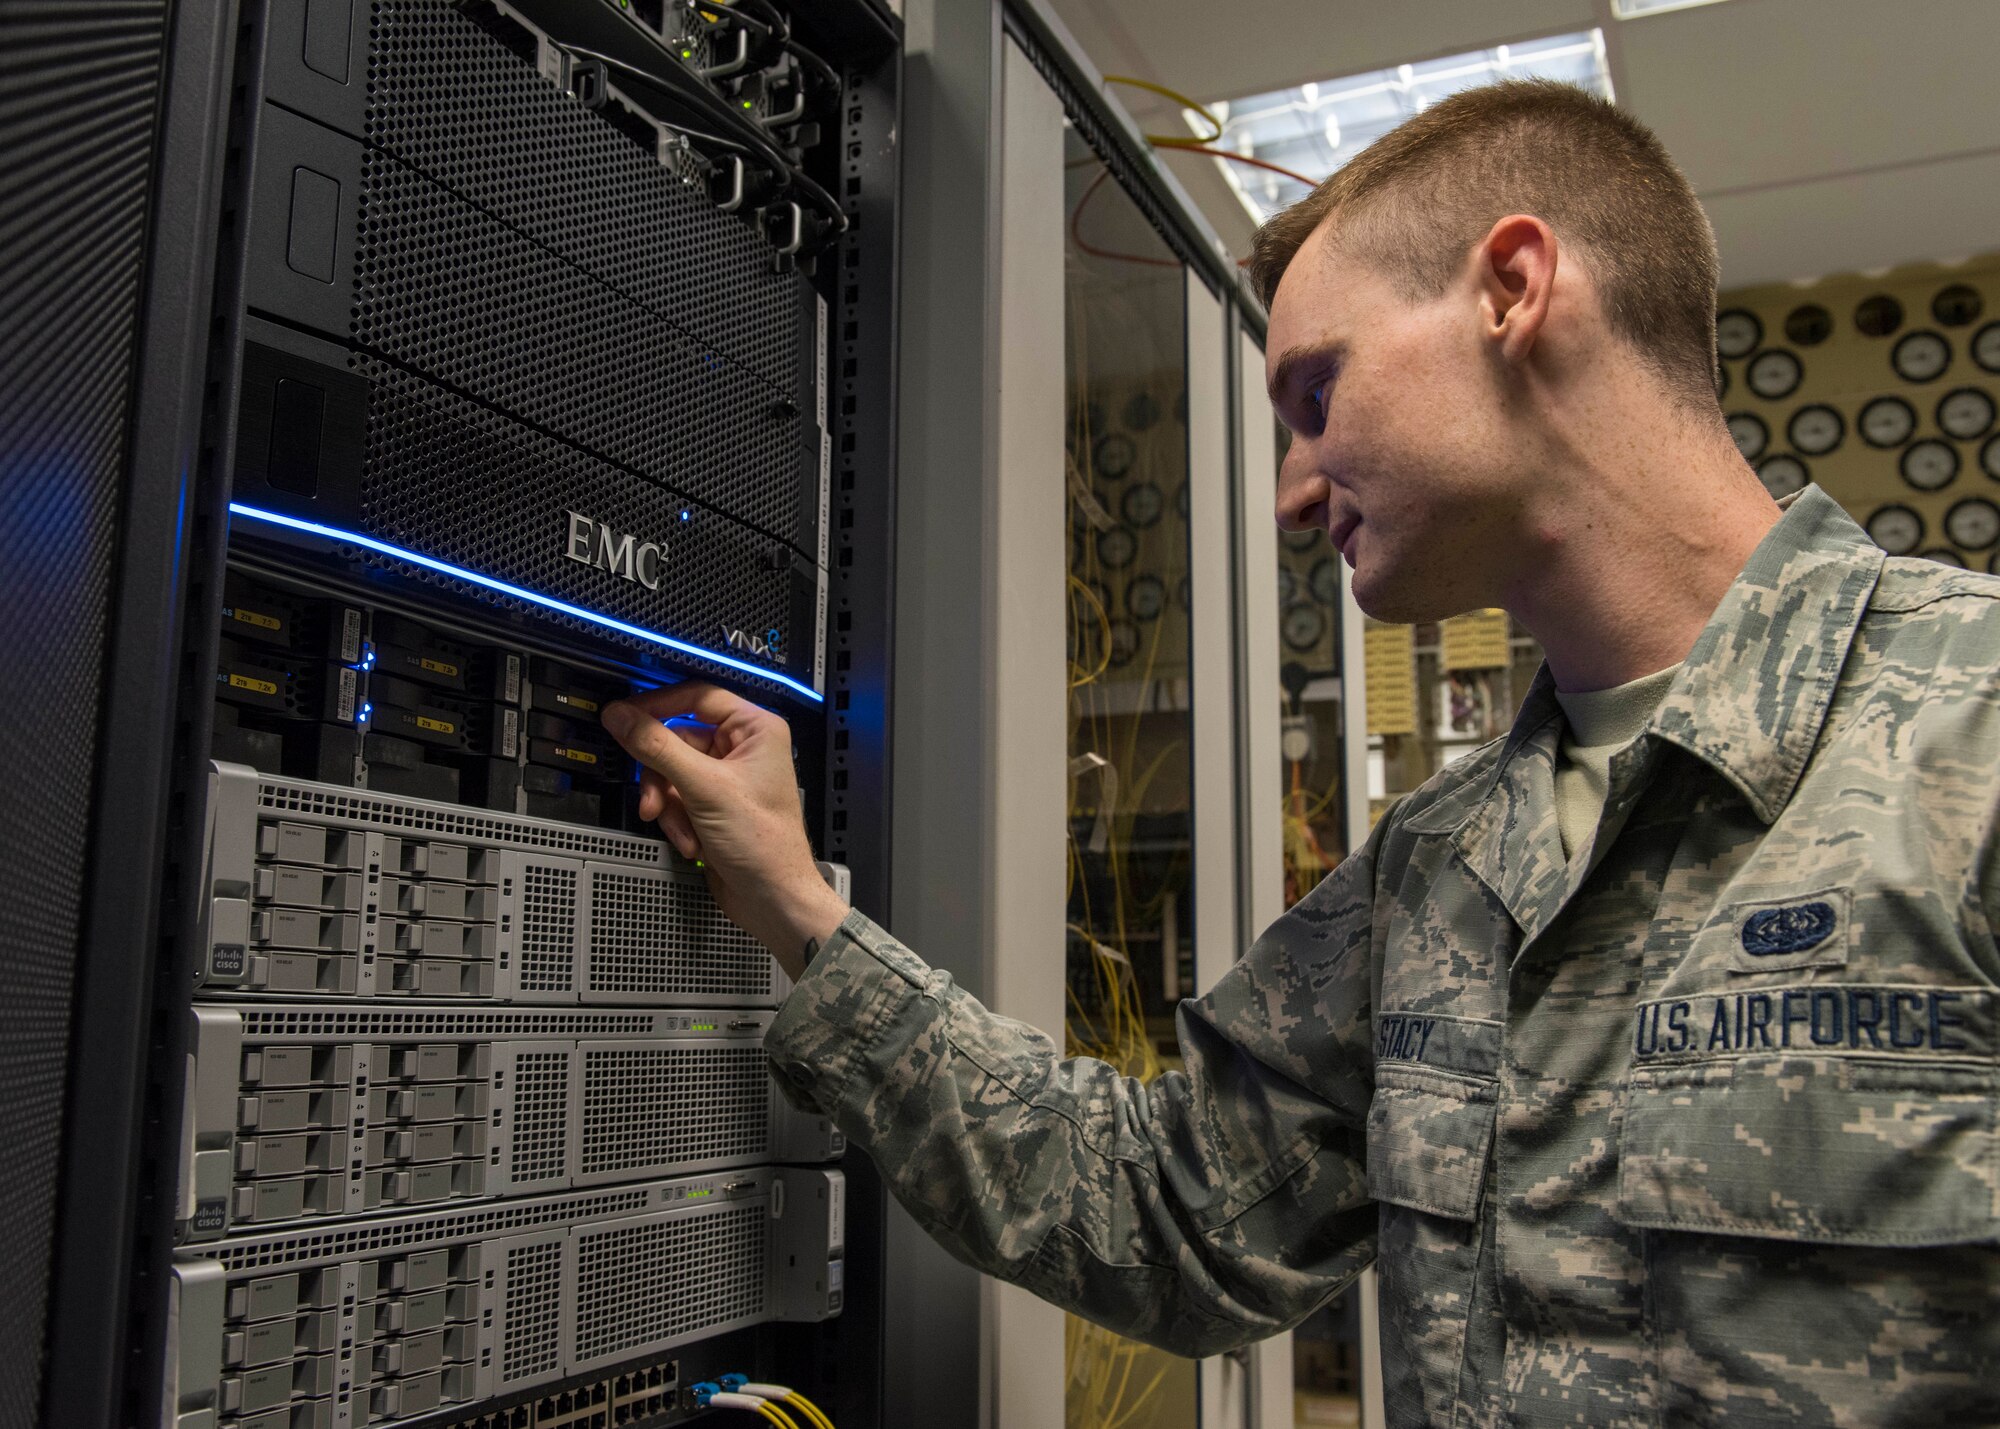 U.S. Air Force Senior Airman Dorian Stacy, 423rd Communications Squadron network operations technician, inspects the backup hard drives at RAF Alconbury, England, August 8, 2019. Stacy is in charge of securing network operations and ensuring proper access and permissions are in place at RAF Alconbury and RAF Molesworth. (U.S. Air Force photo by Airman 1st Class Jennifer Zima)